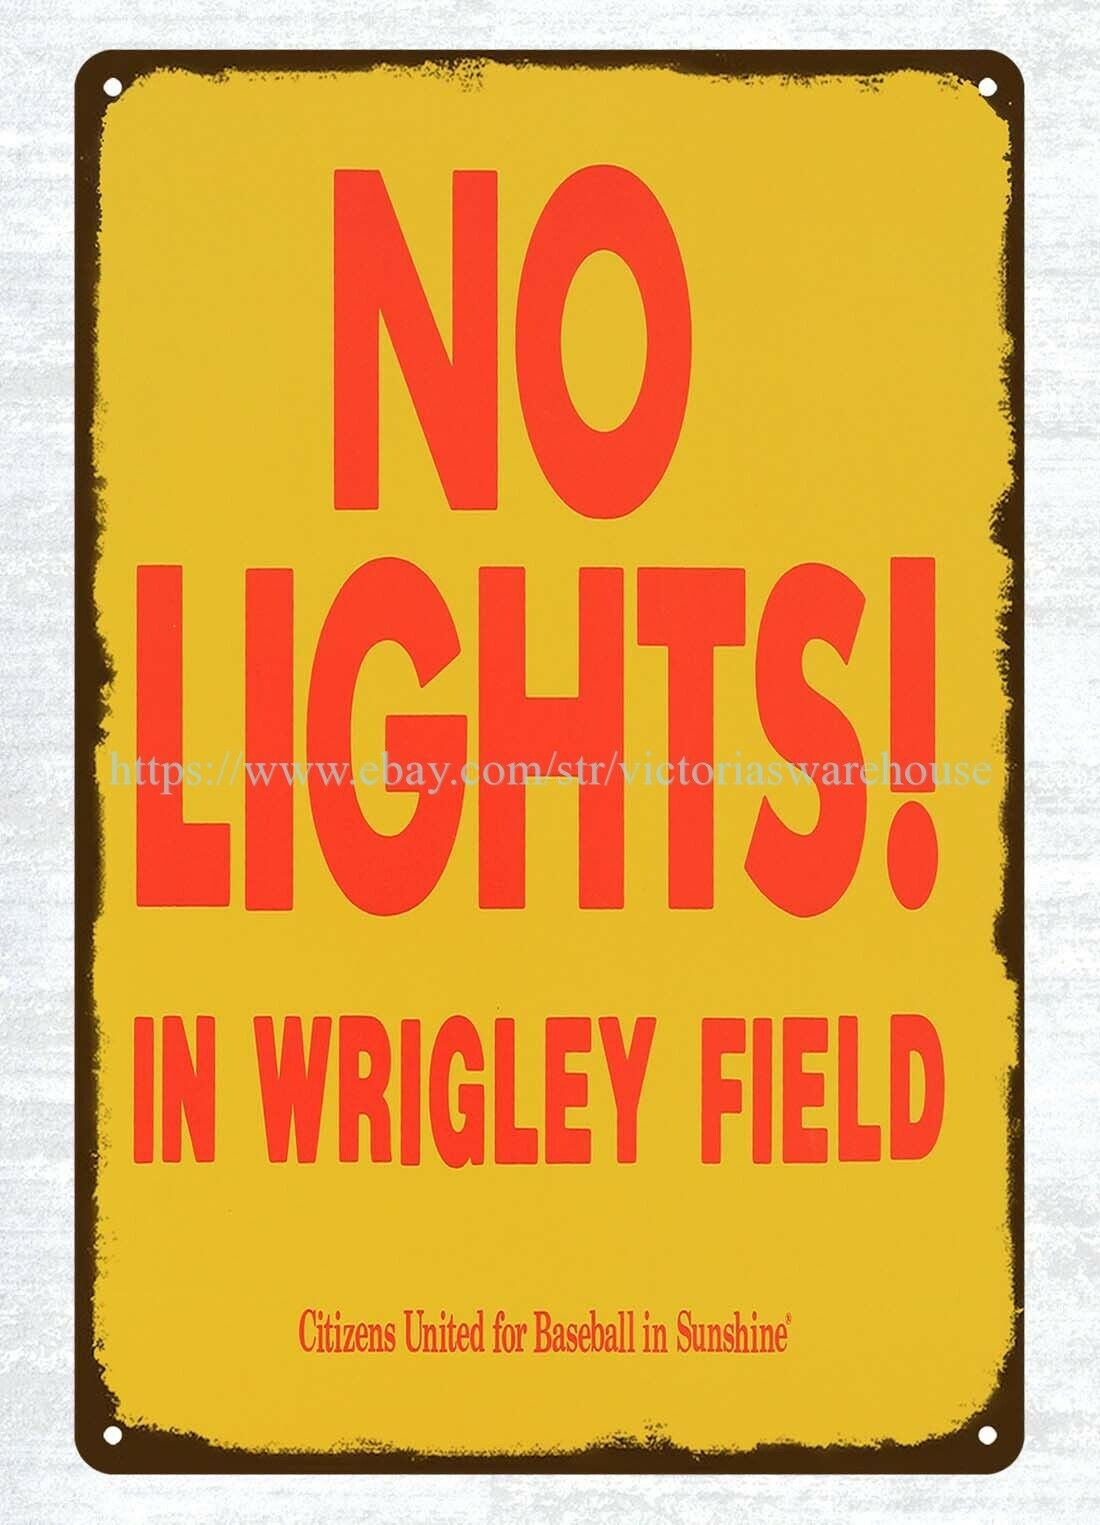 1989 No Lights In Wrigley Field Citizens United For Baseball In Sunshine metal